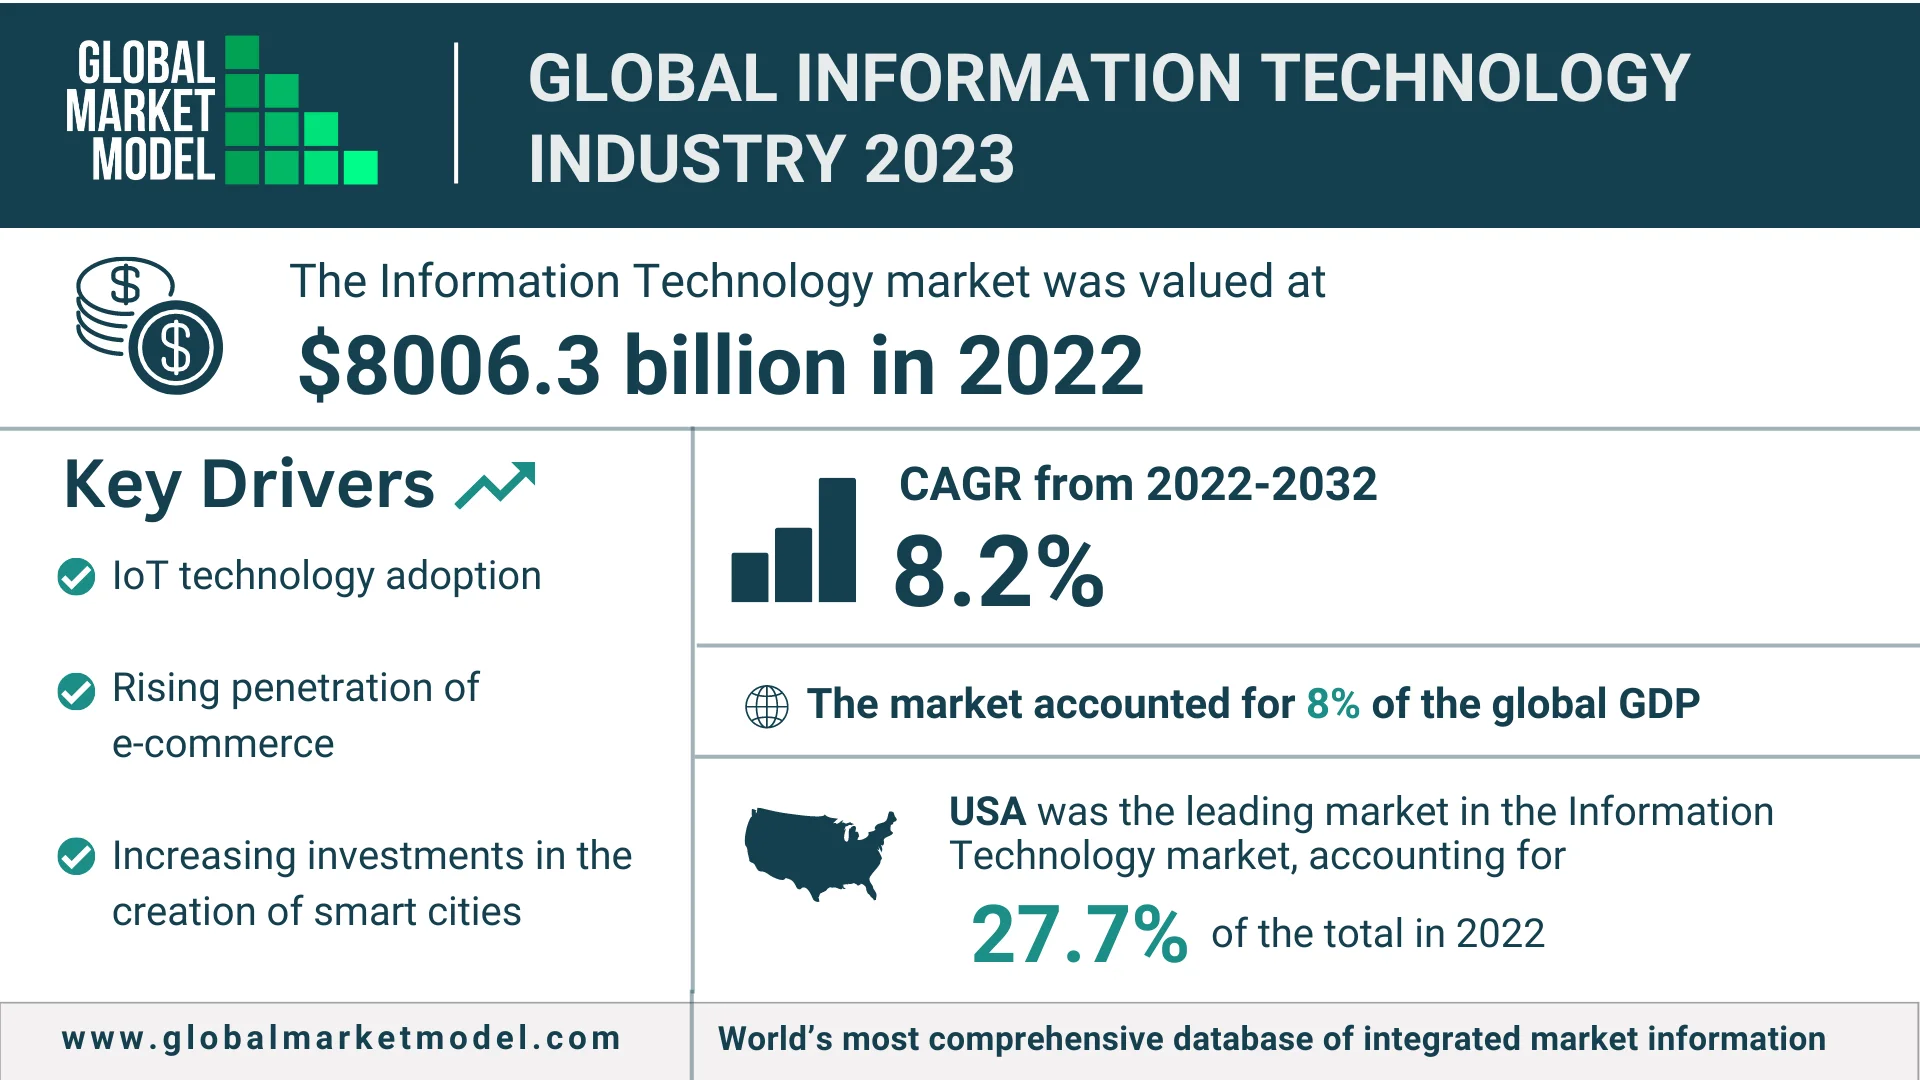 Global Information Technology Industry 2023